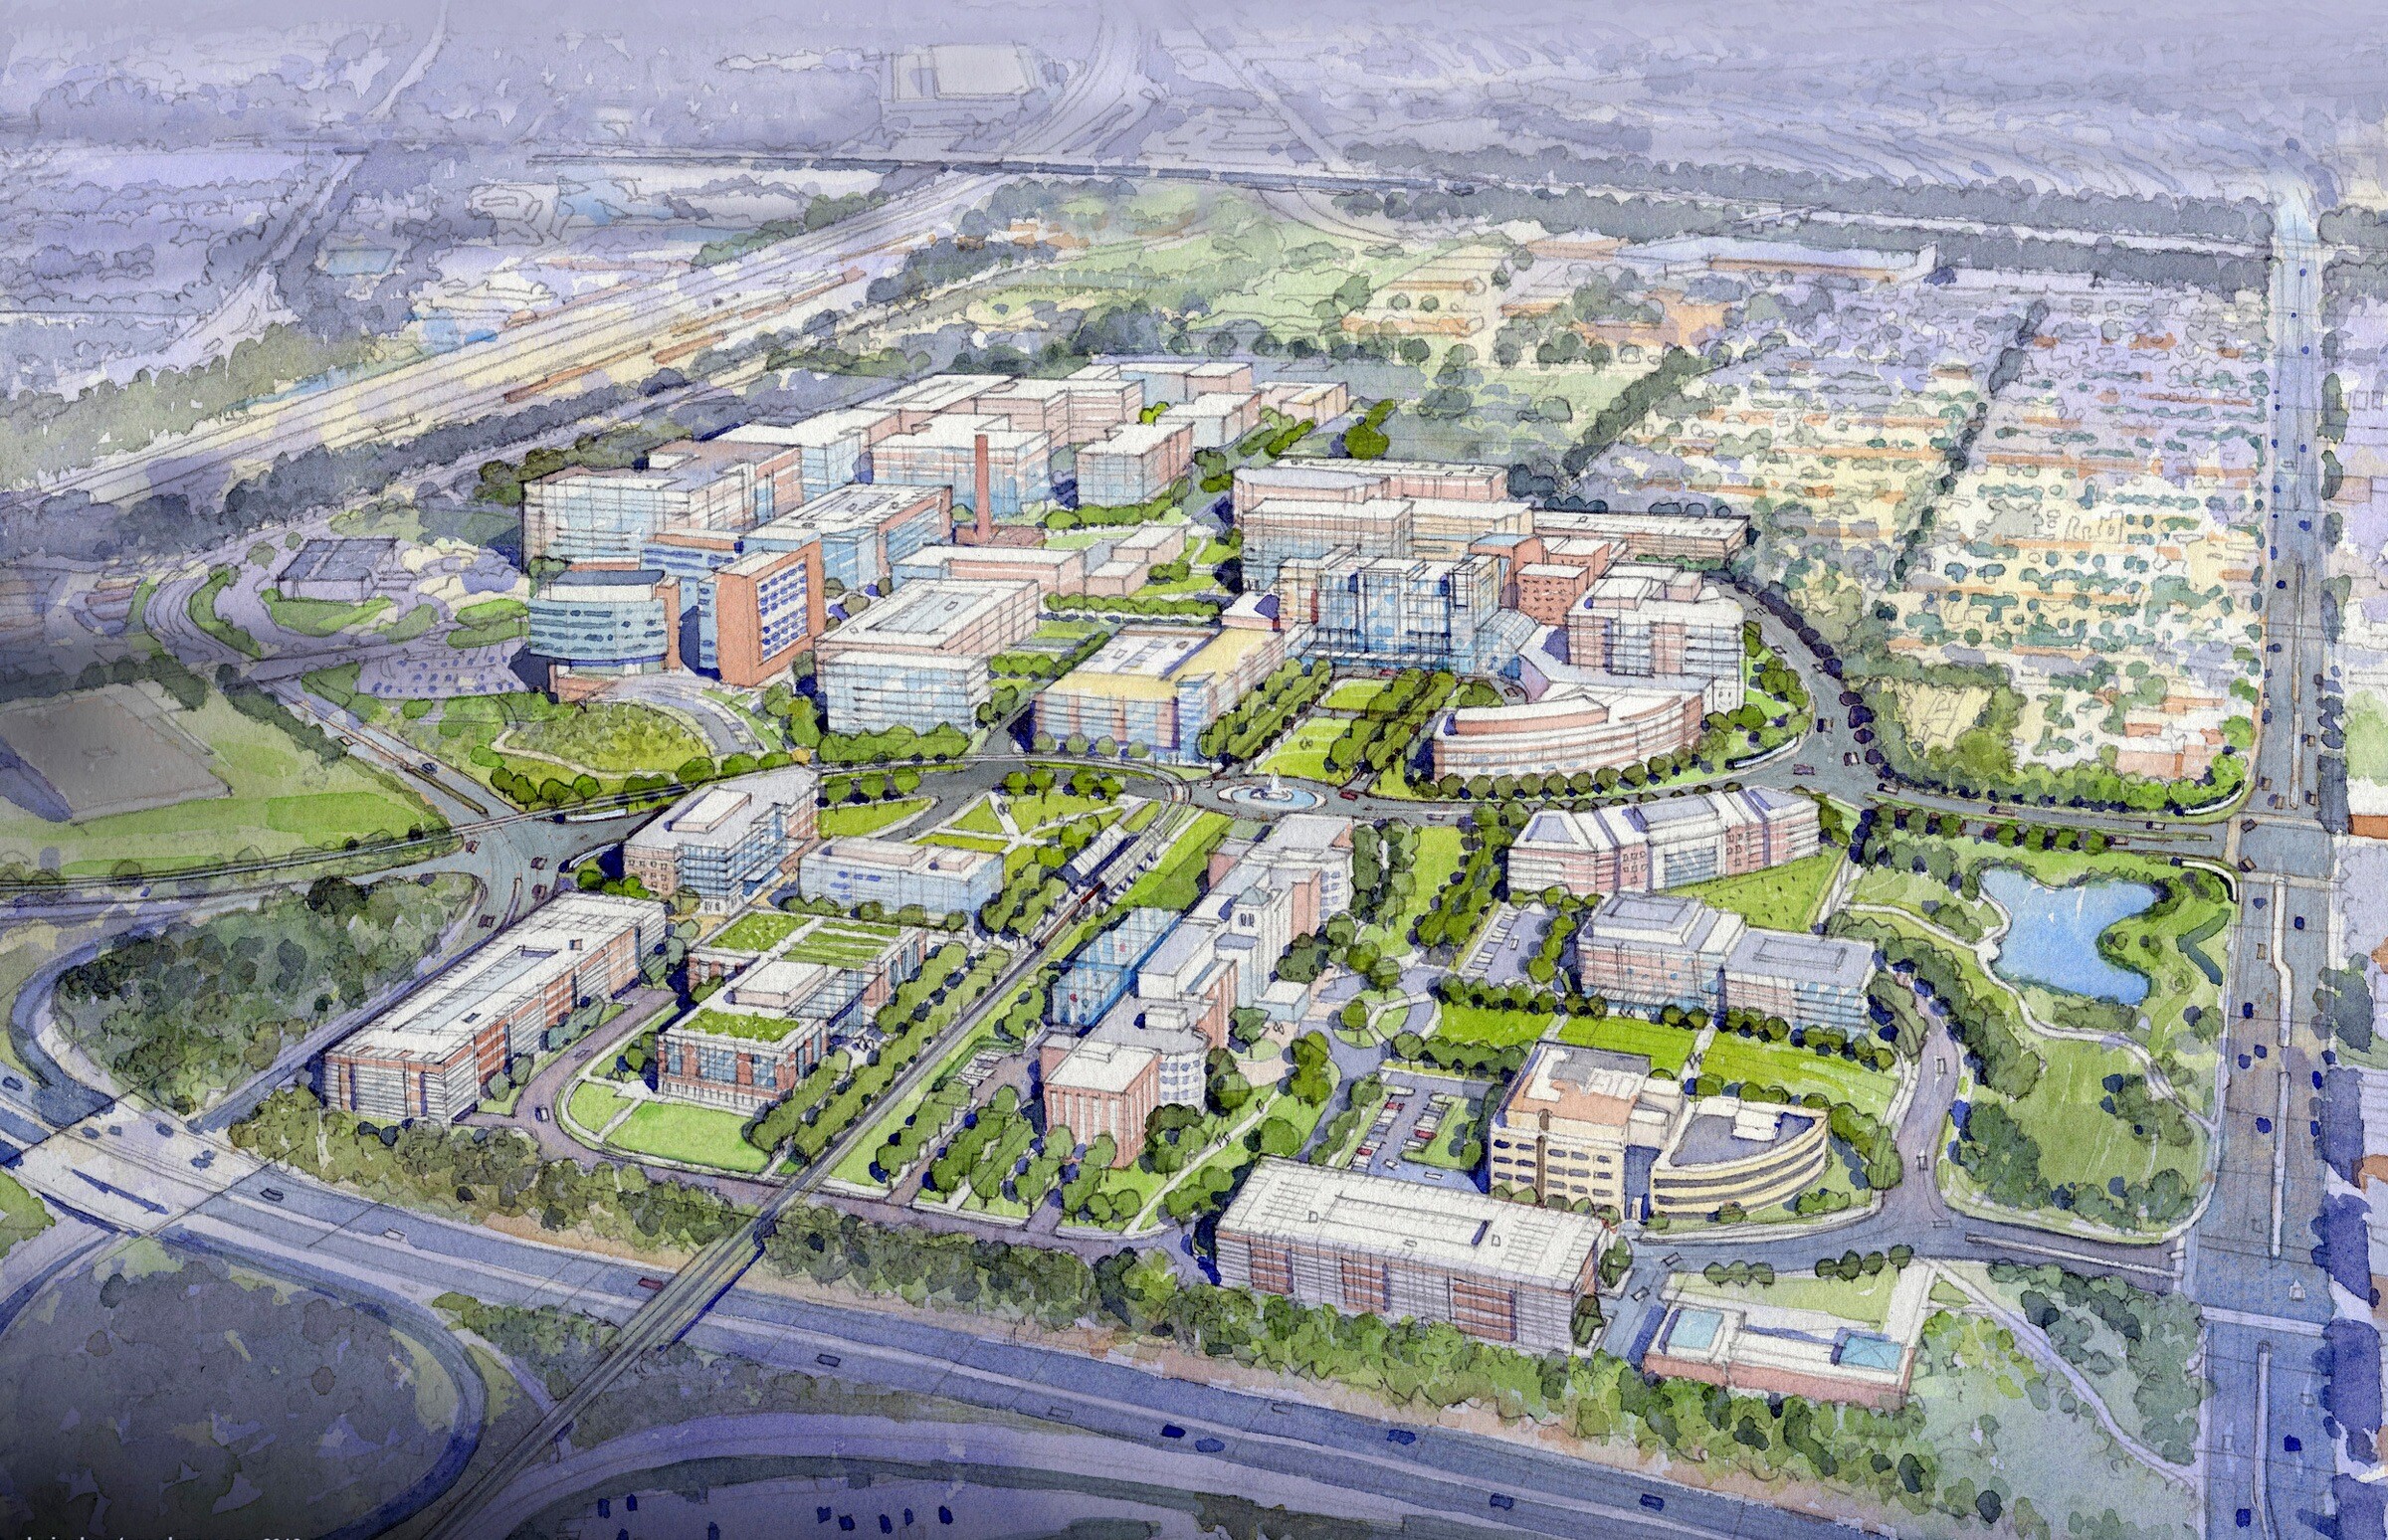 1 Johns Hopkins Bayview Medical Center Campus Master Plan 5 10 Year Rendering E1644606825694 